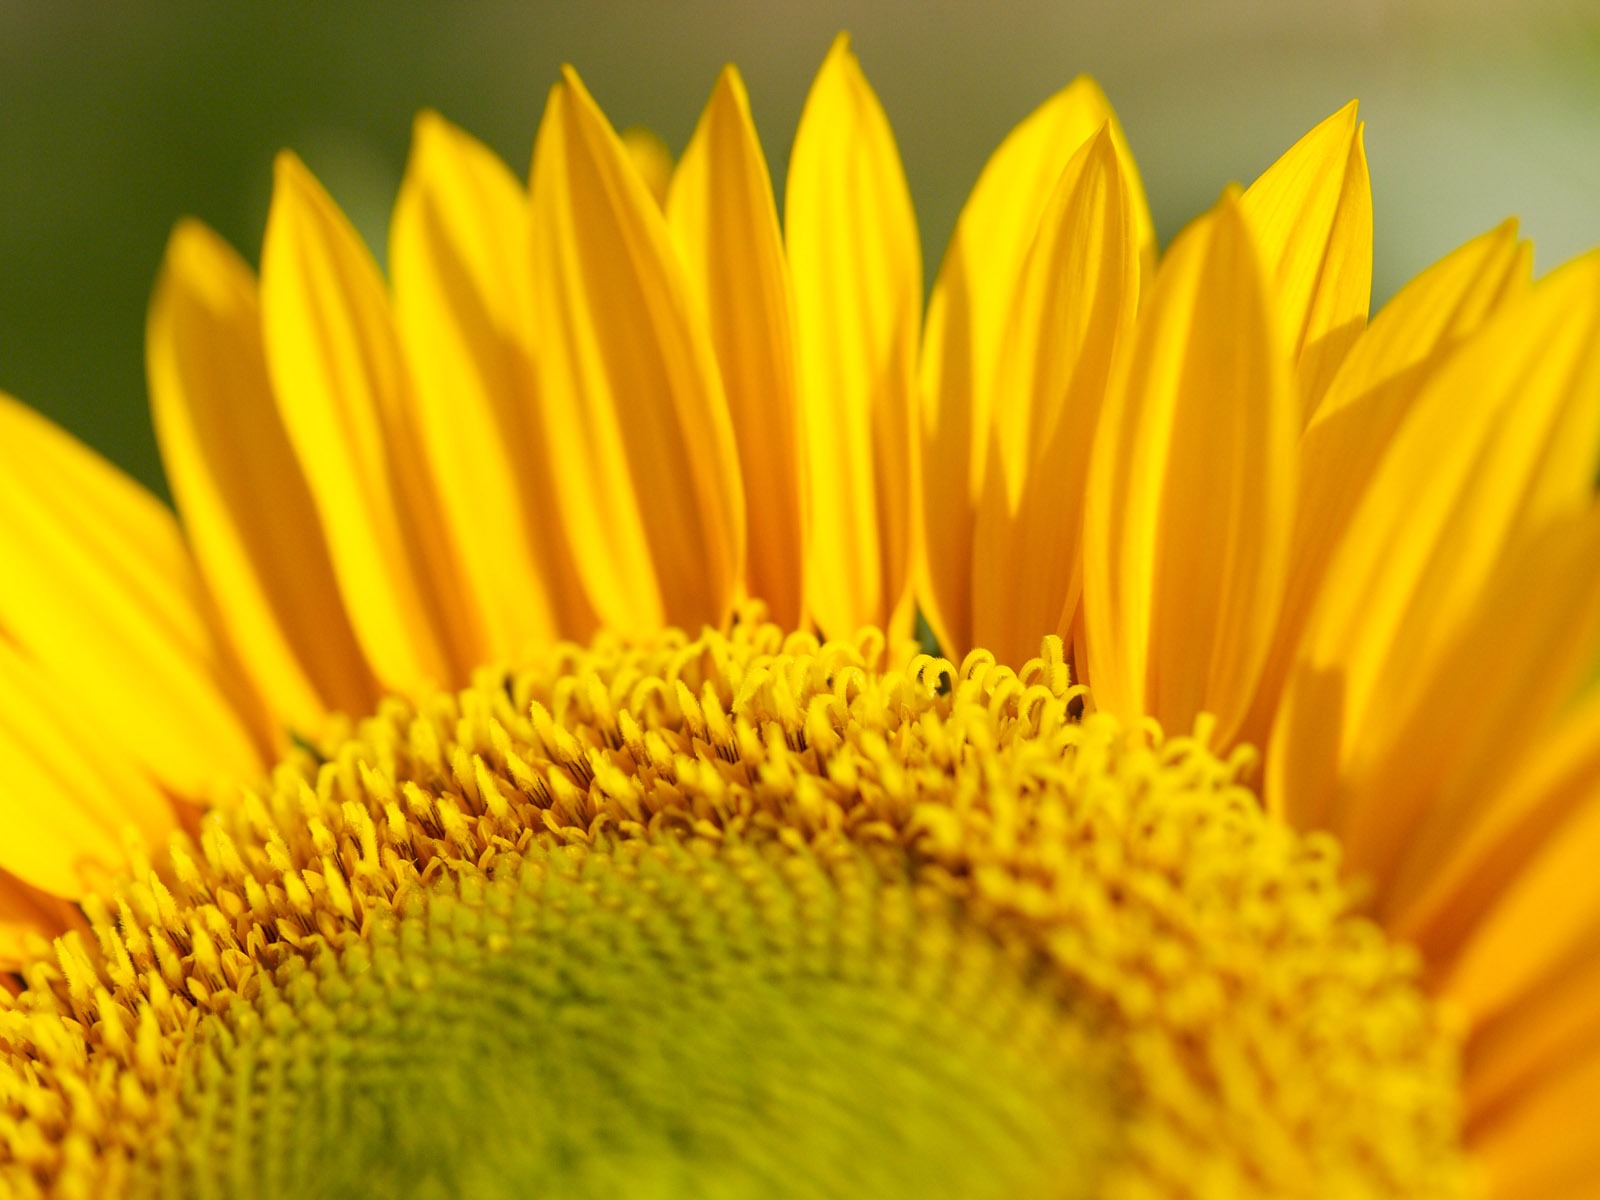 Sunny sunflower photo HD Wallpapers #29 - 1600x1200